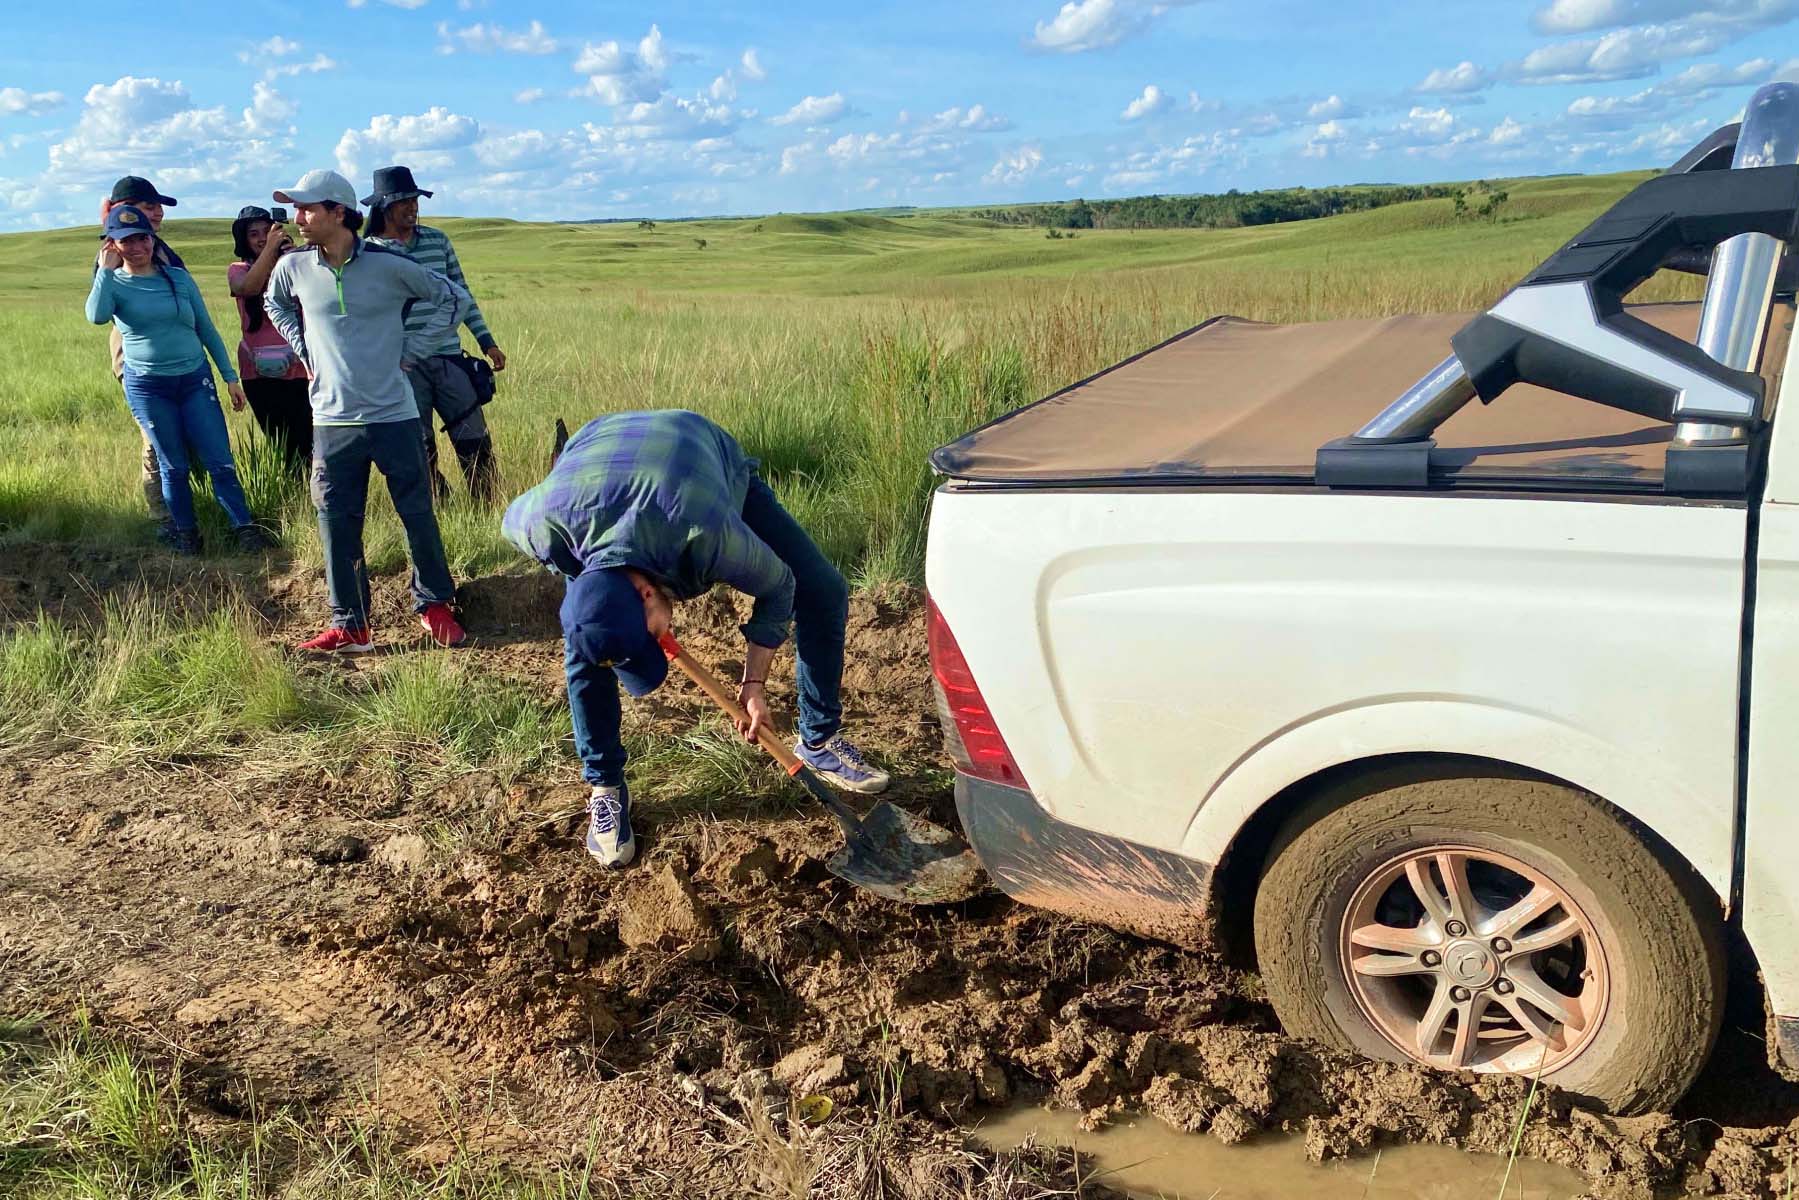 A group of people wait while a person in a baseball cap works to dig a white truck out of the mud.